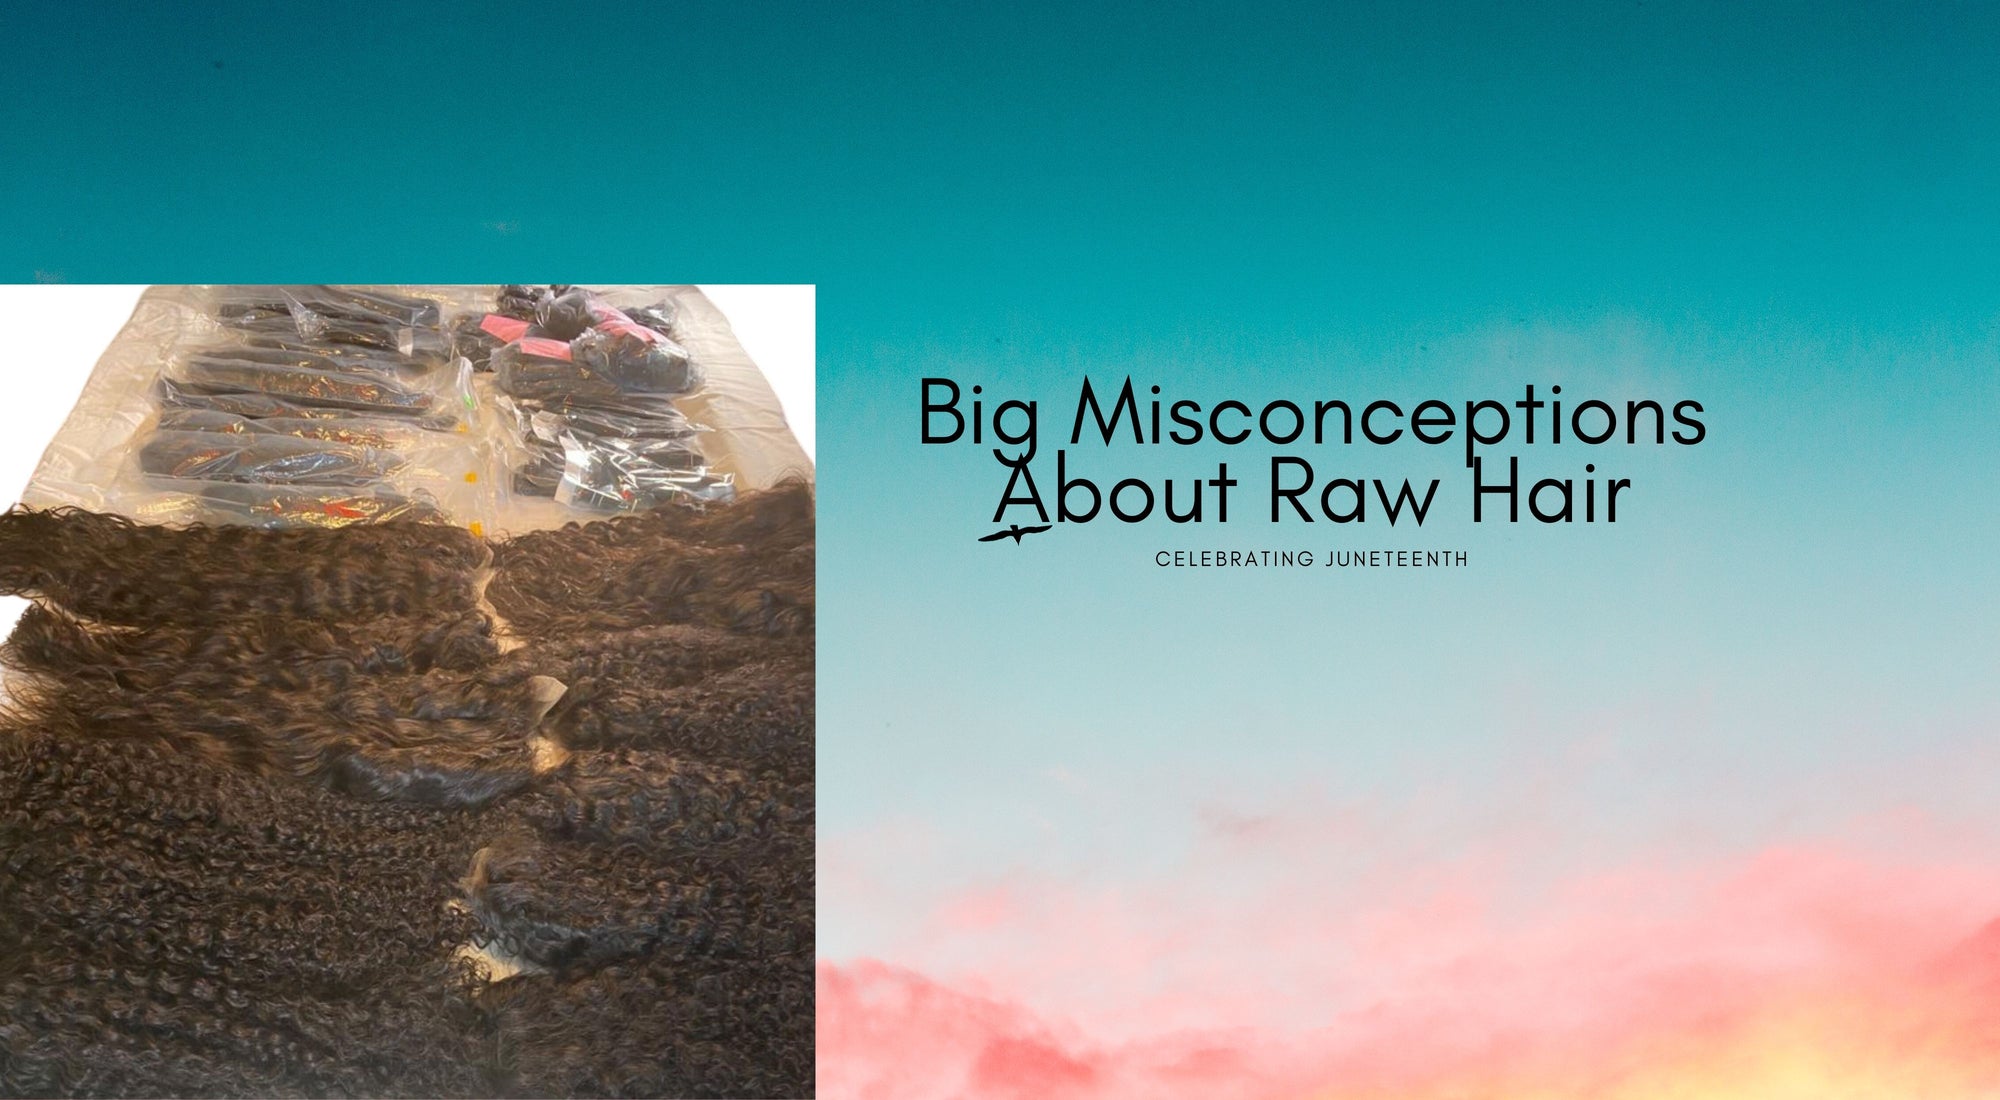 Big Misconceptions About Raw Hair